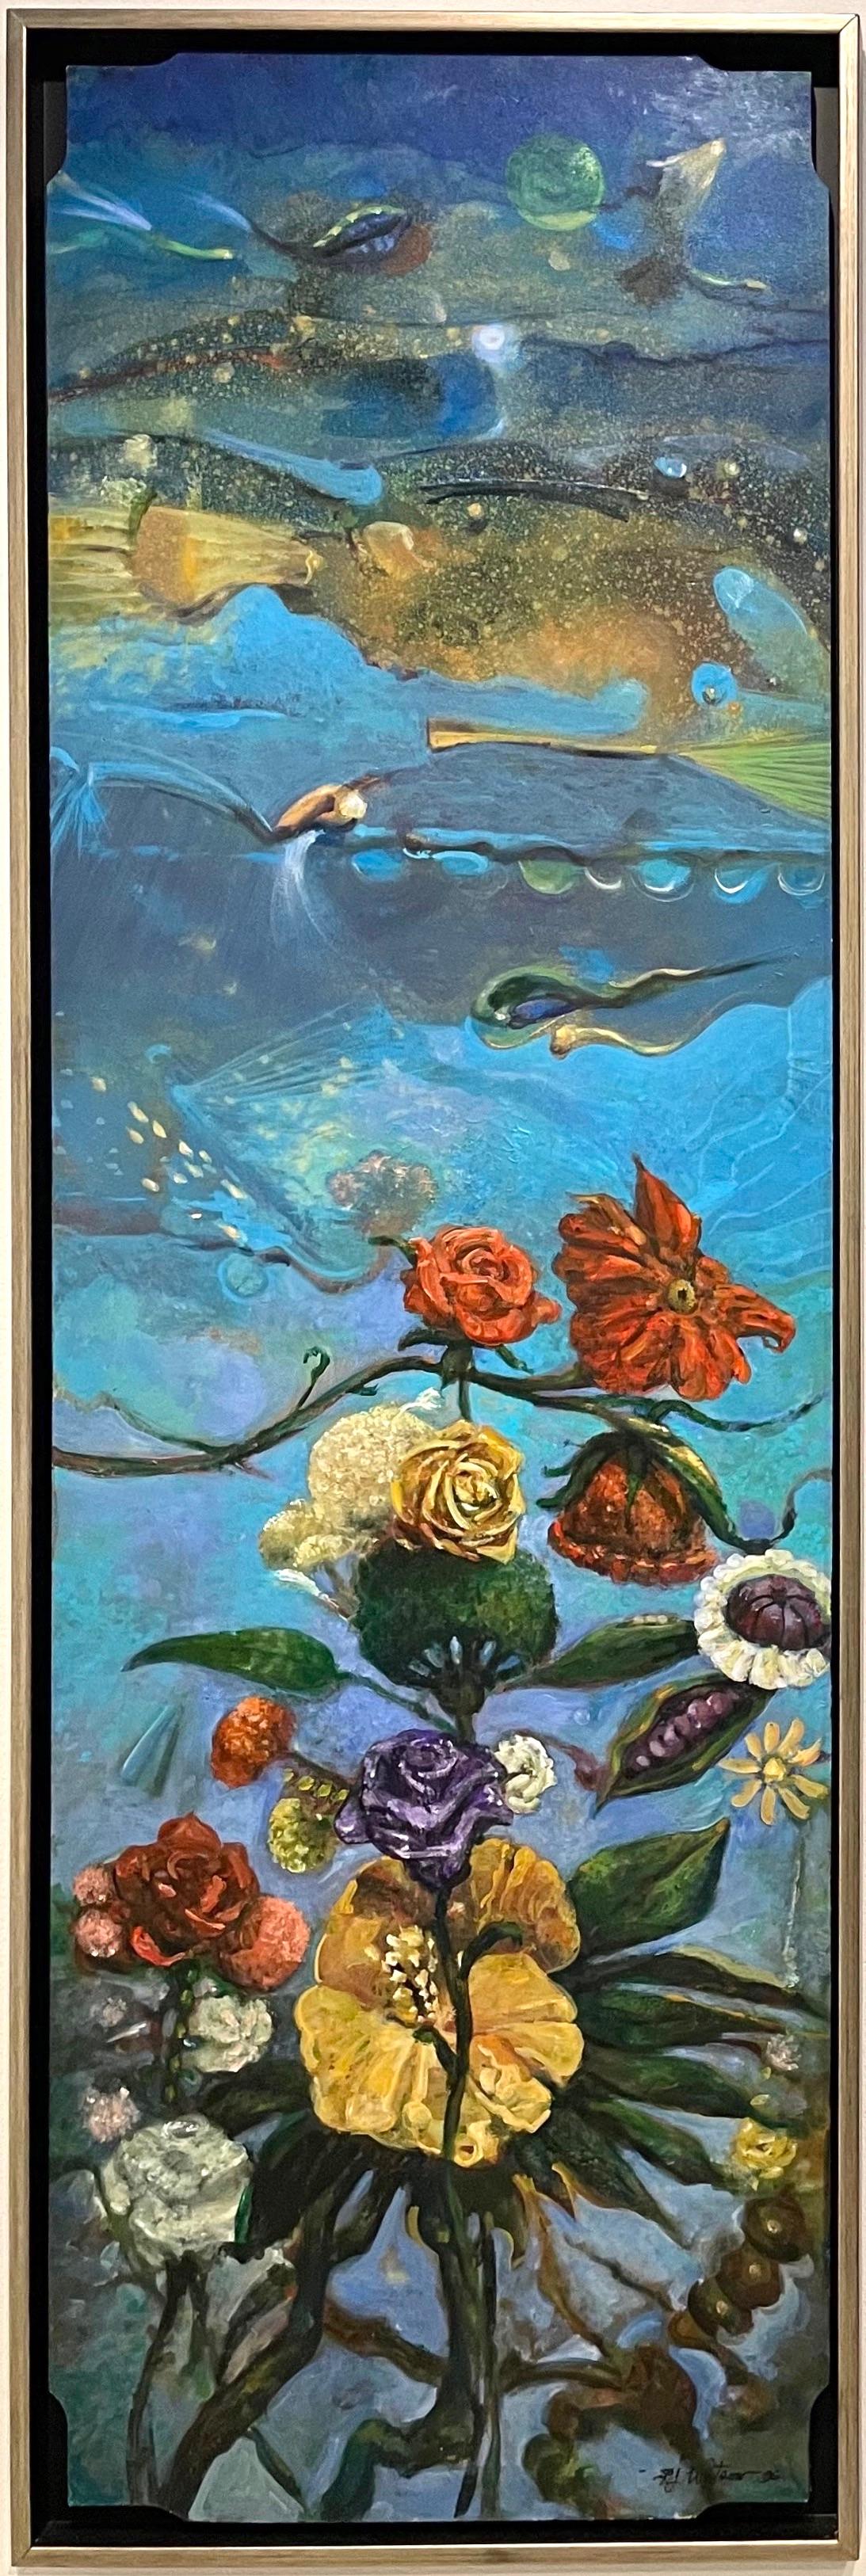 Richard J. Watson Abstract Painting - Free Association I: abstract imagined landscape painting w/ flowers & blue ocean